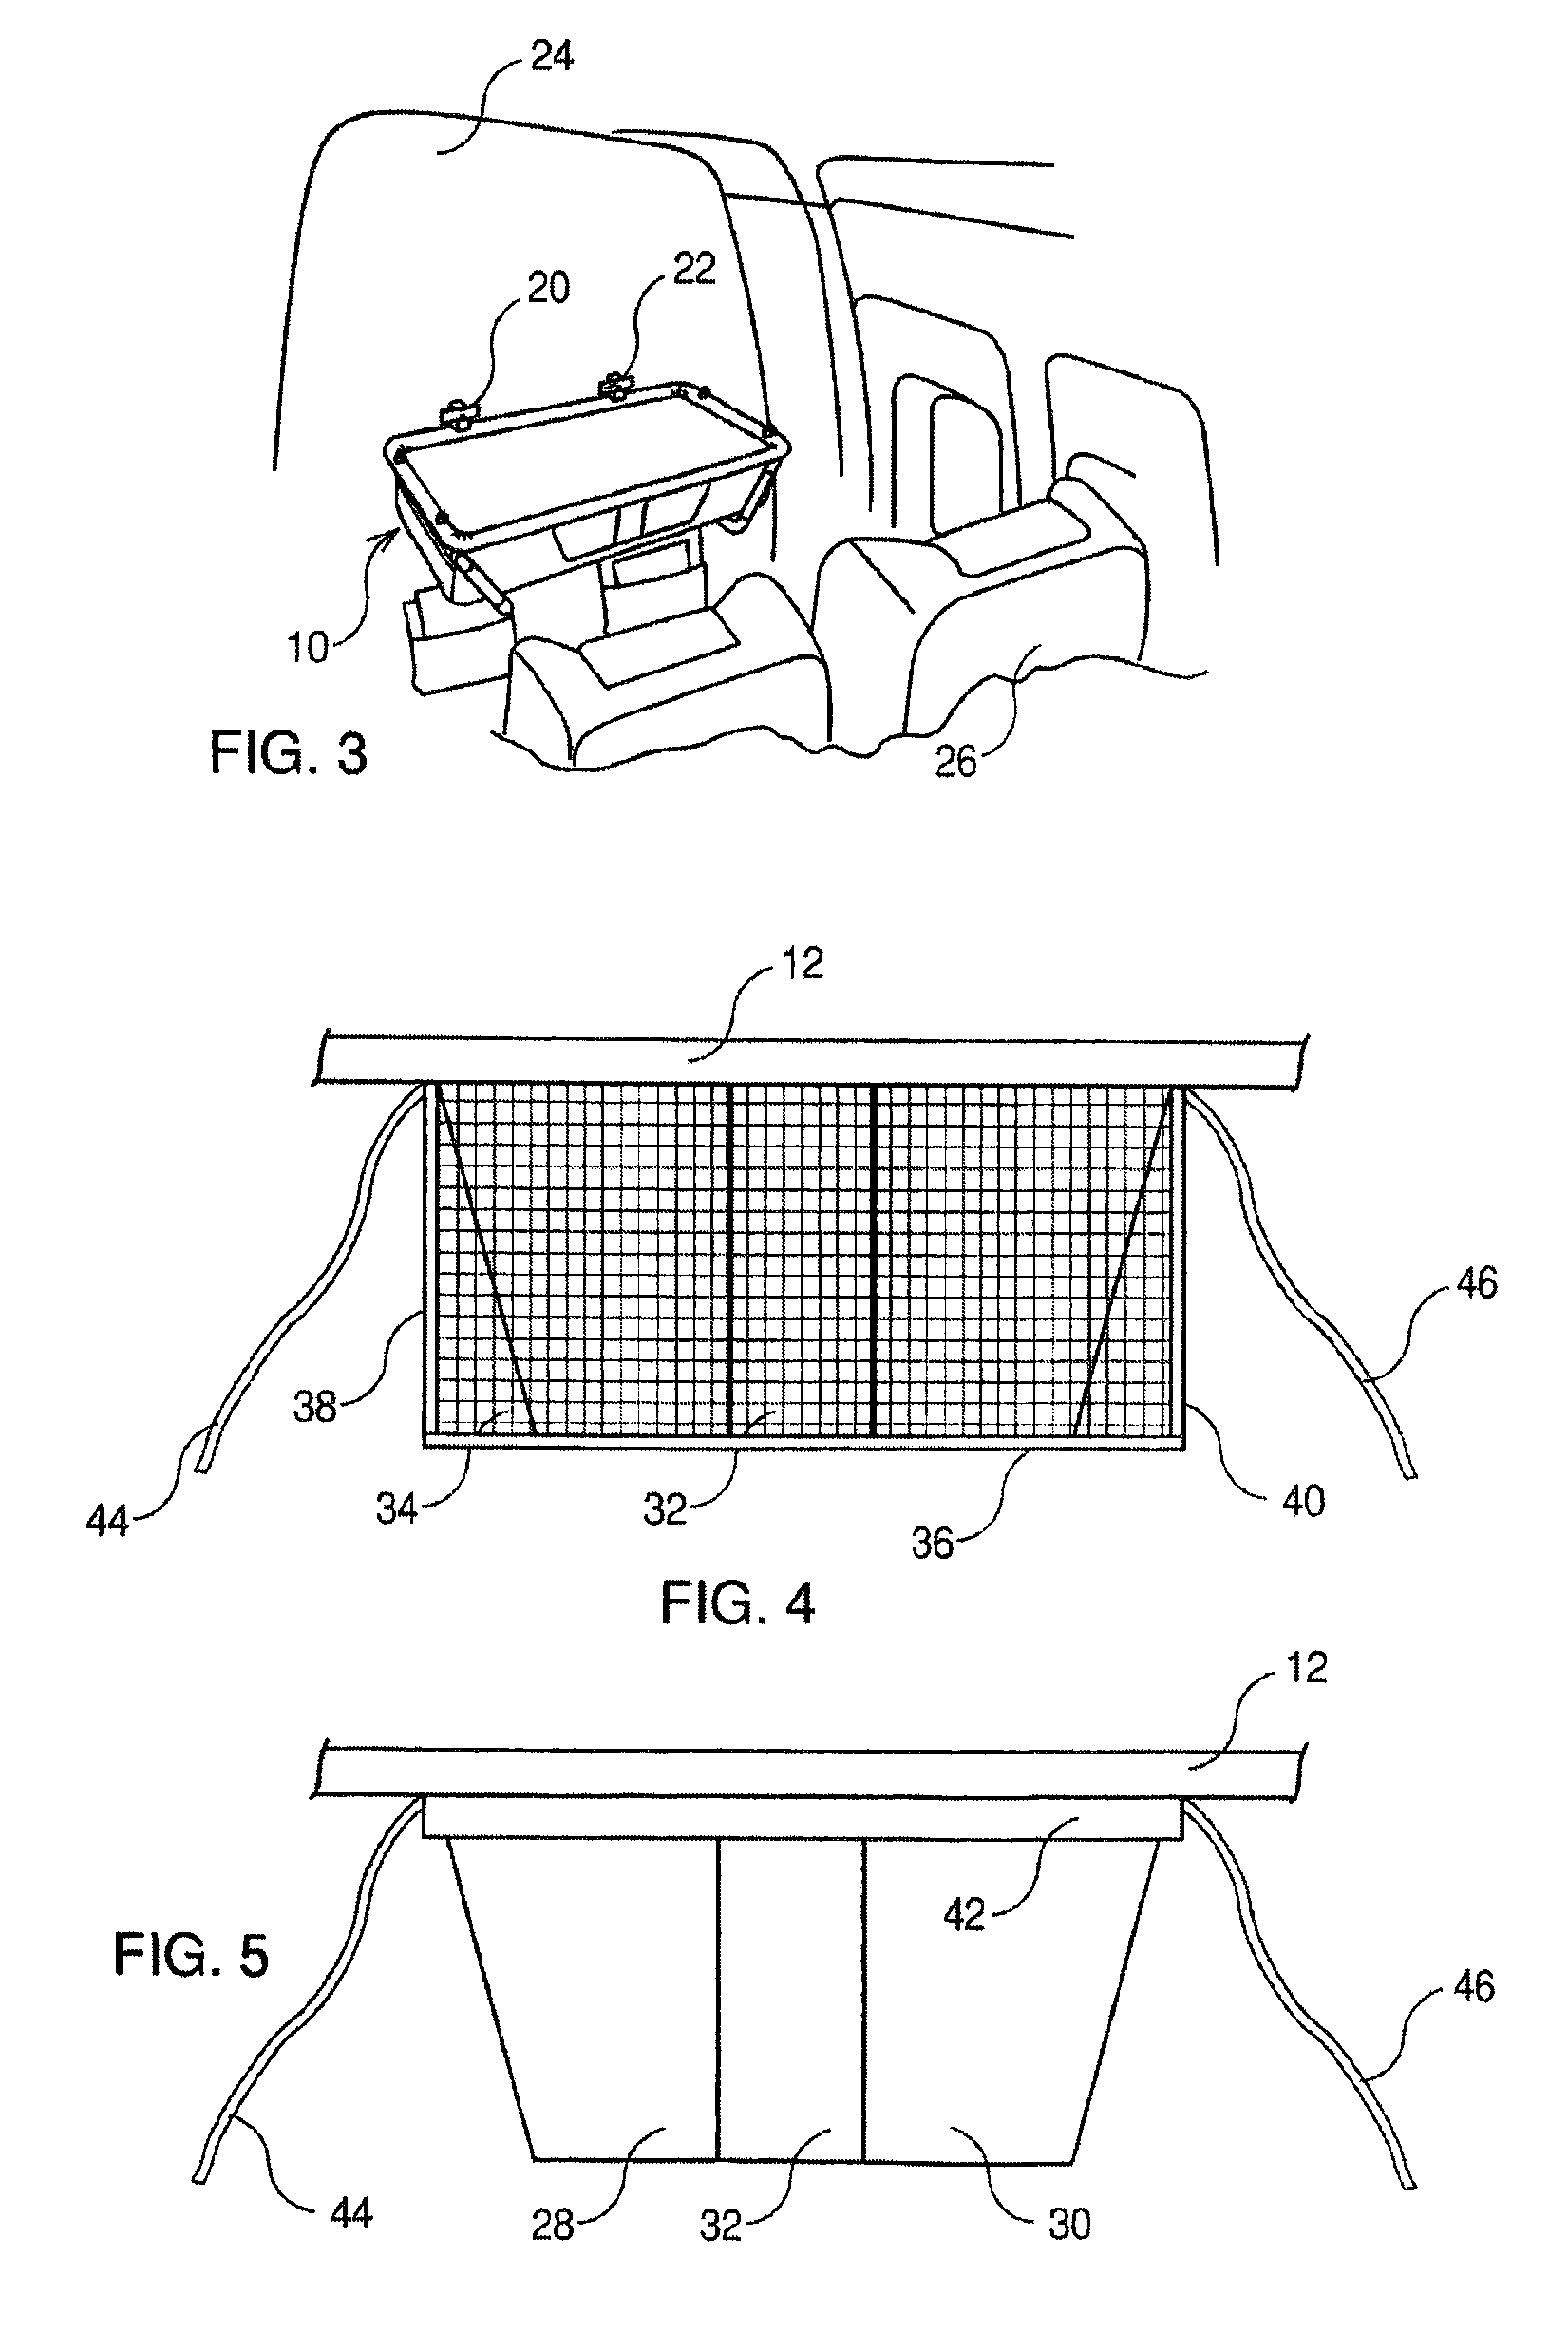 Cradle adaptable to an aircraft seat